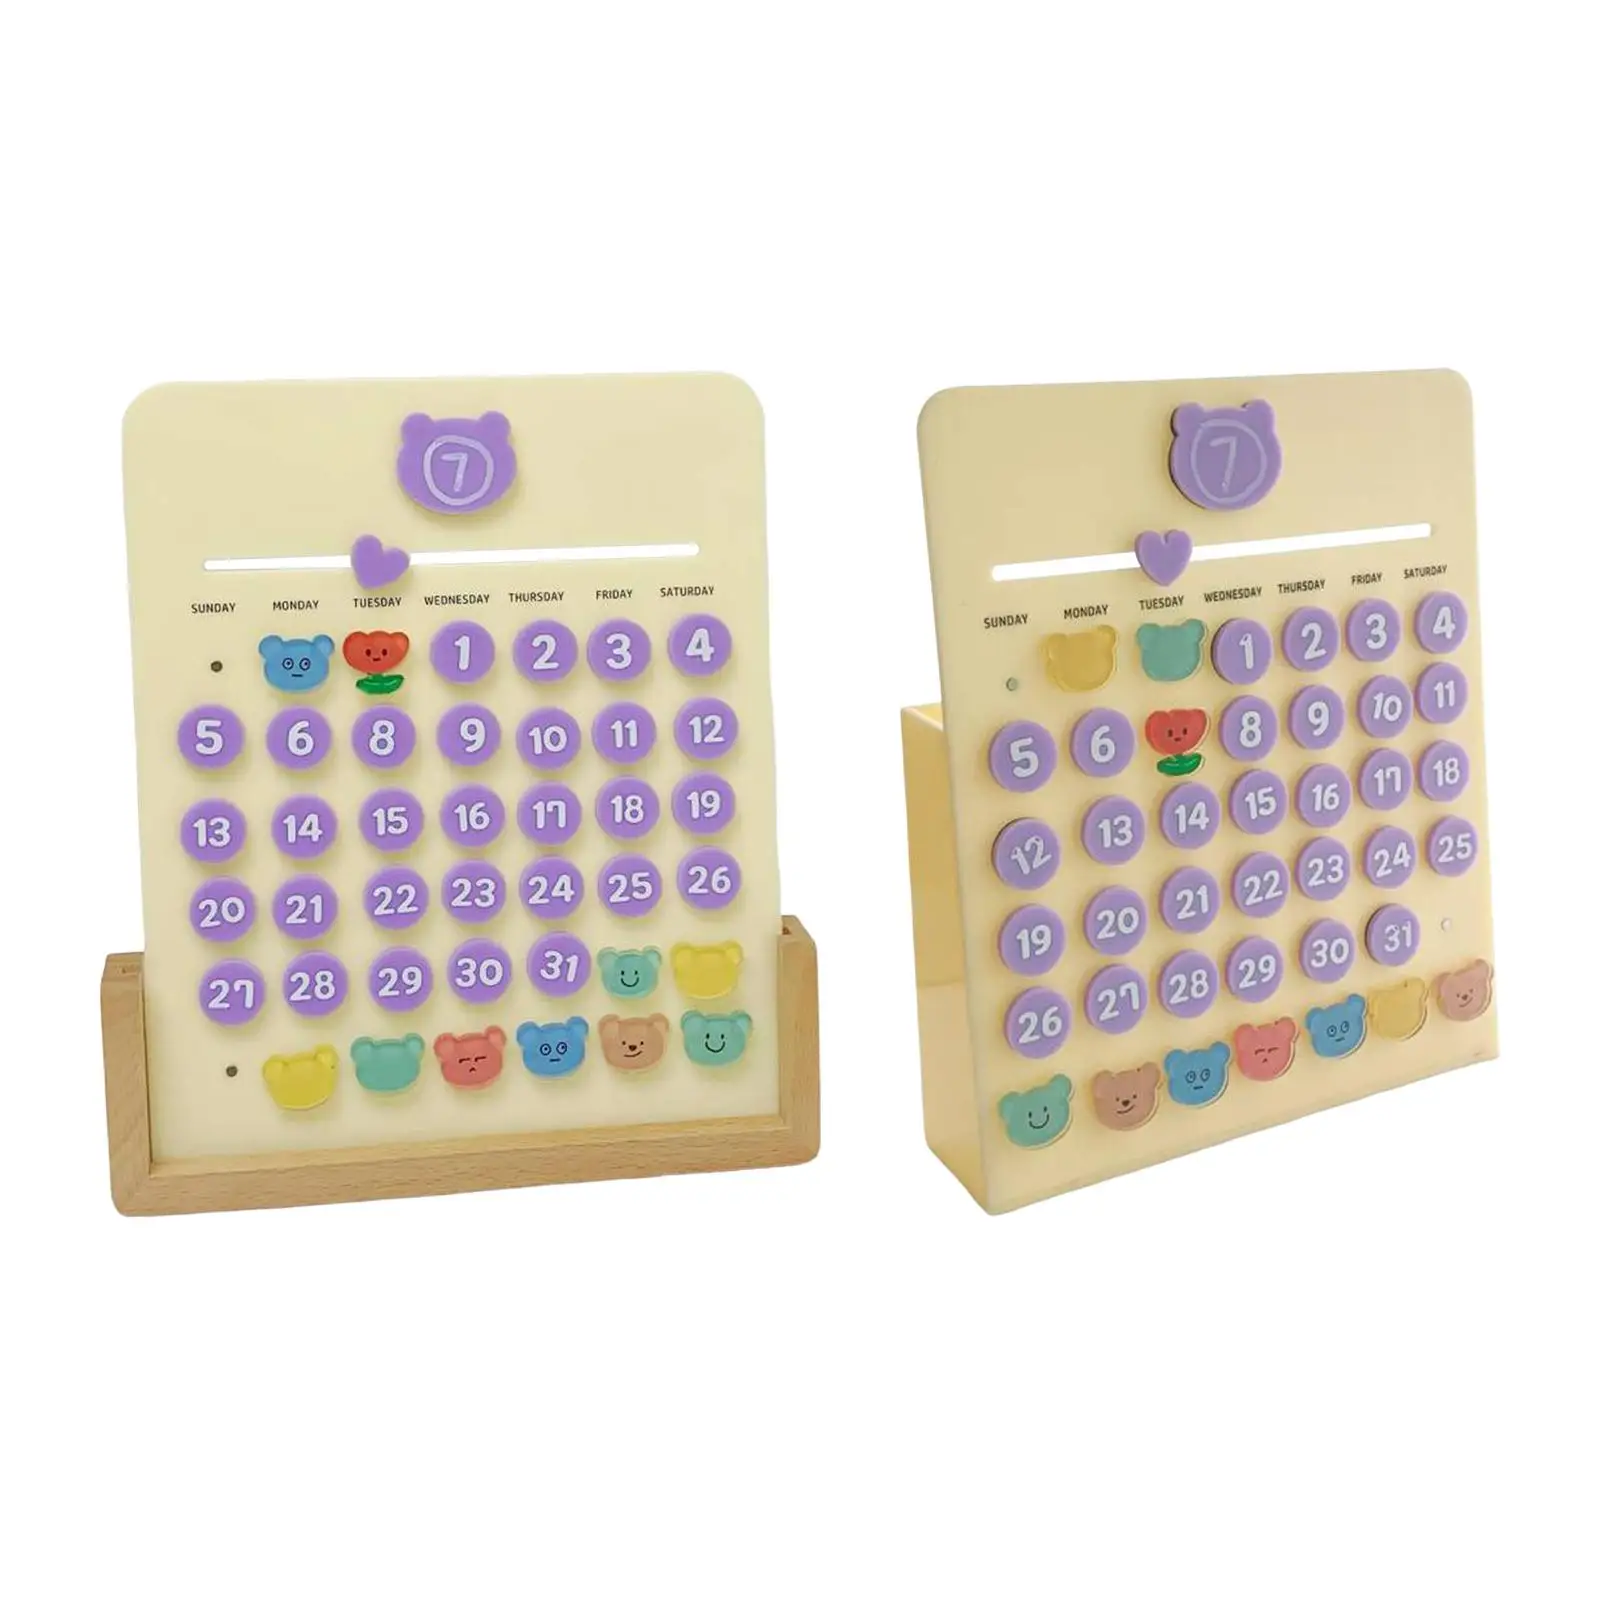 Calendar Educational Toys Learn Months Weeks and Days for Shops Decoration